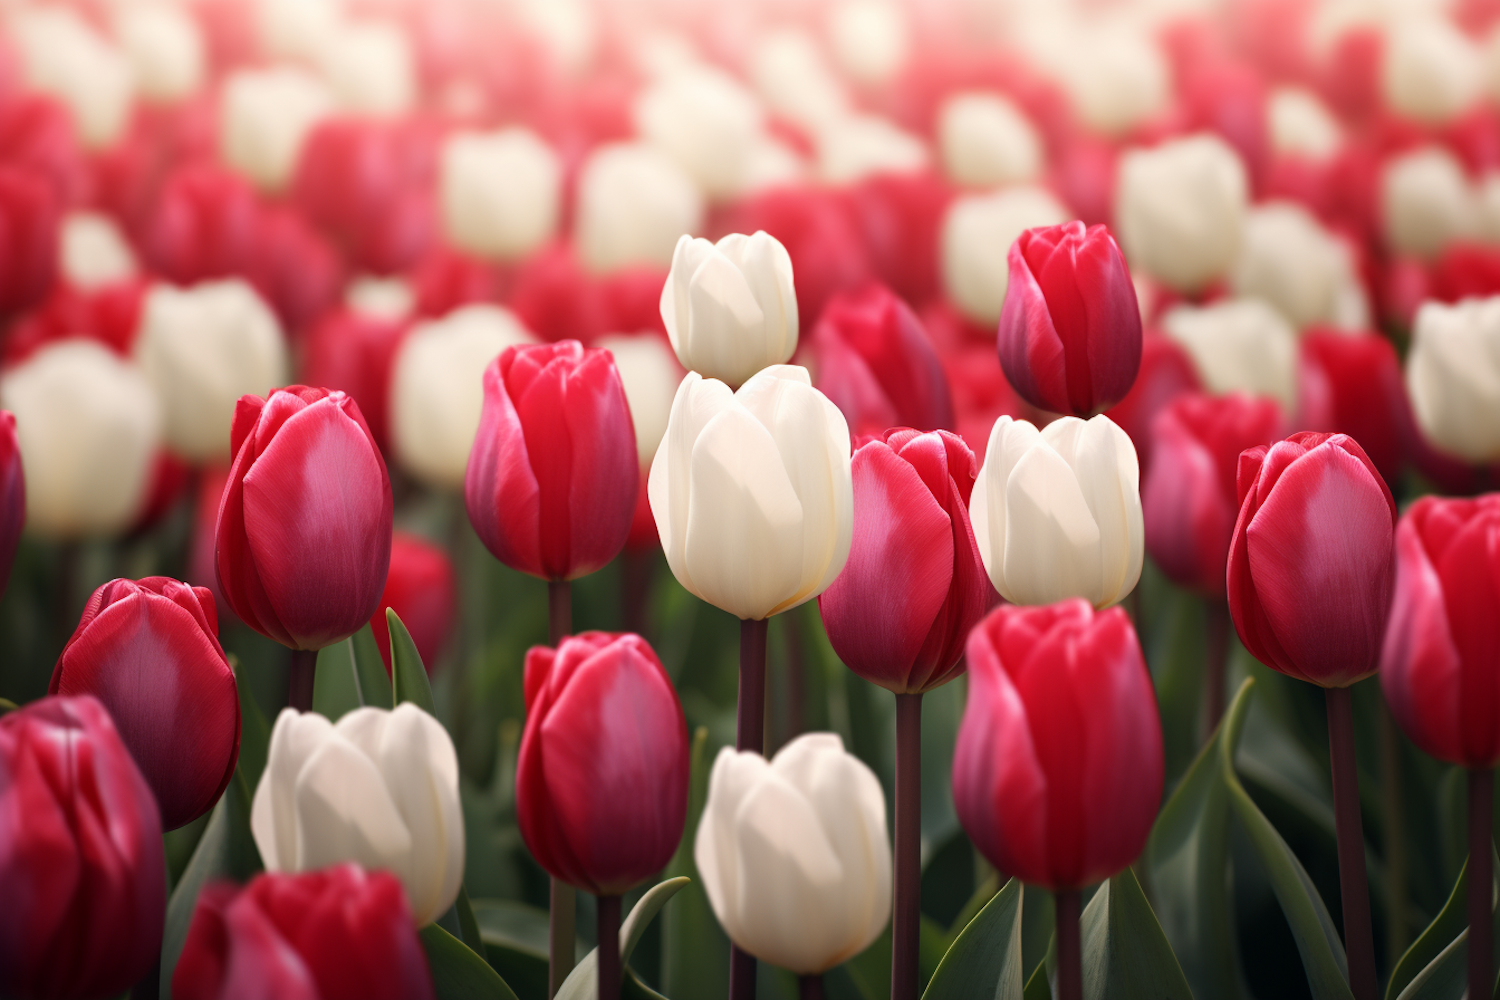 Warm Elegance in Bloom: A Rhythmic Tapestry of Red and White Tulips